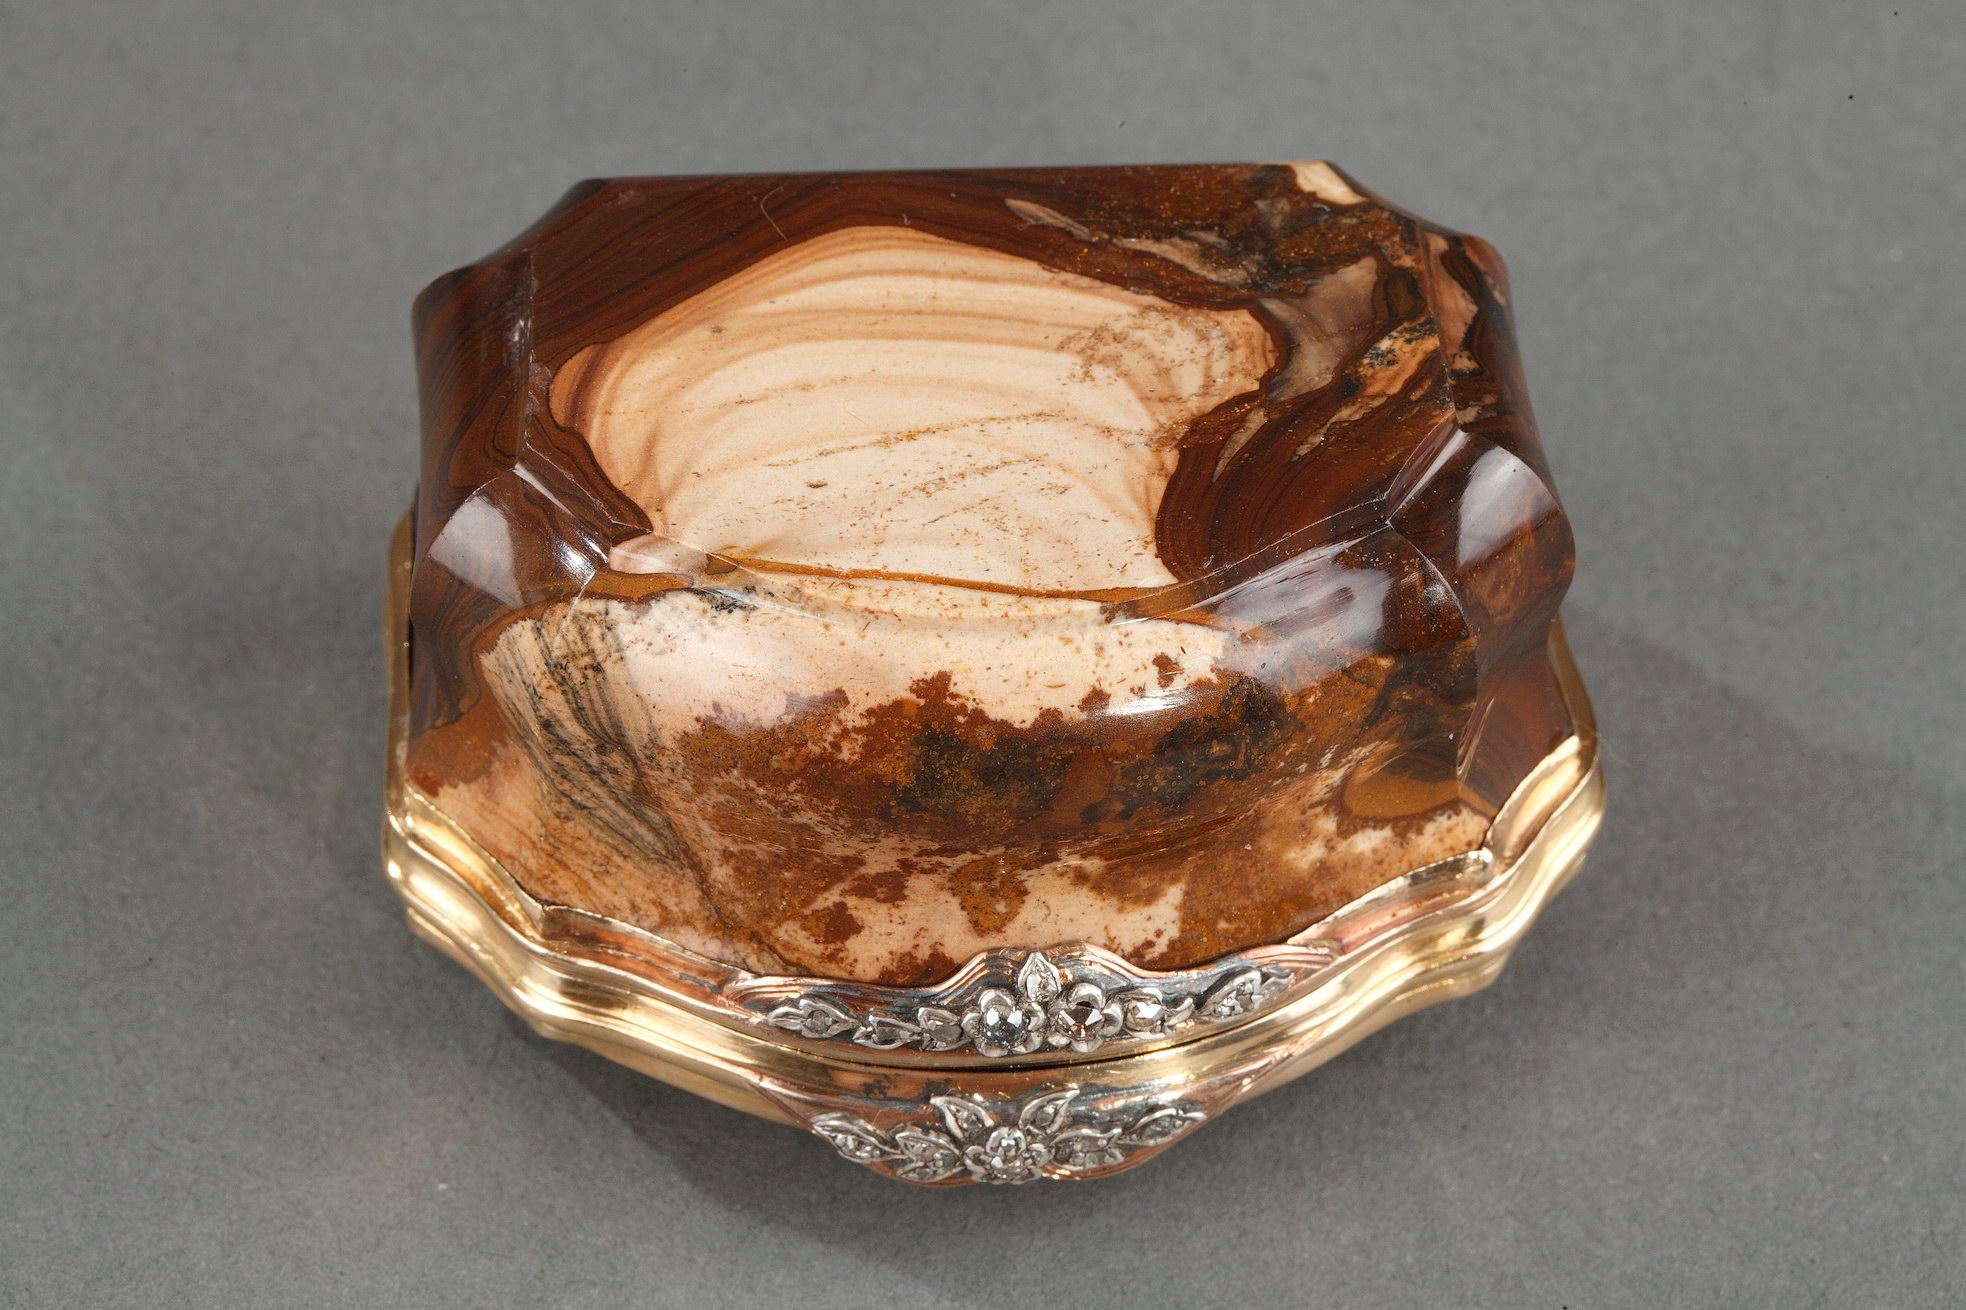 Gold, Agate and Gemstones Snuffbox, 18th Century 9